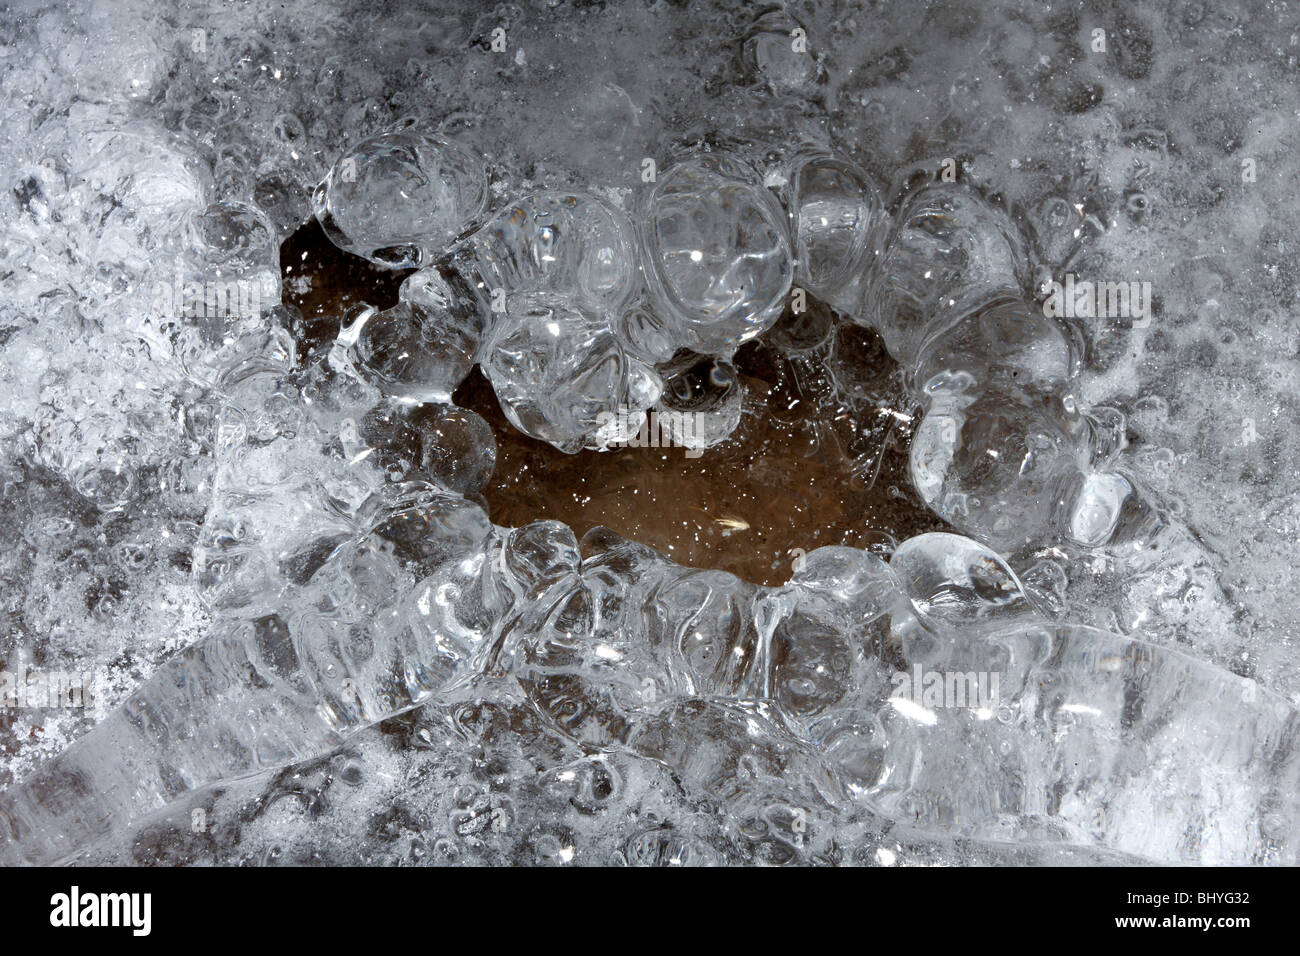 Pit created by falling water, ice nodules and crystals. Stock Photo